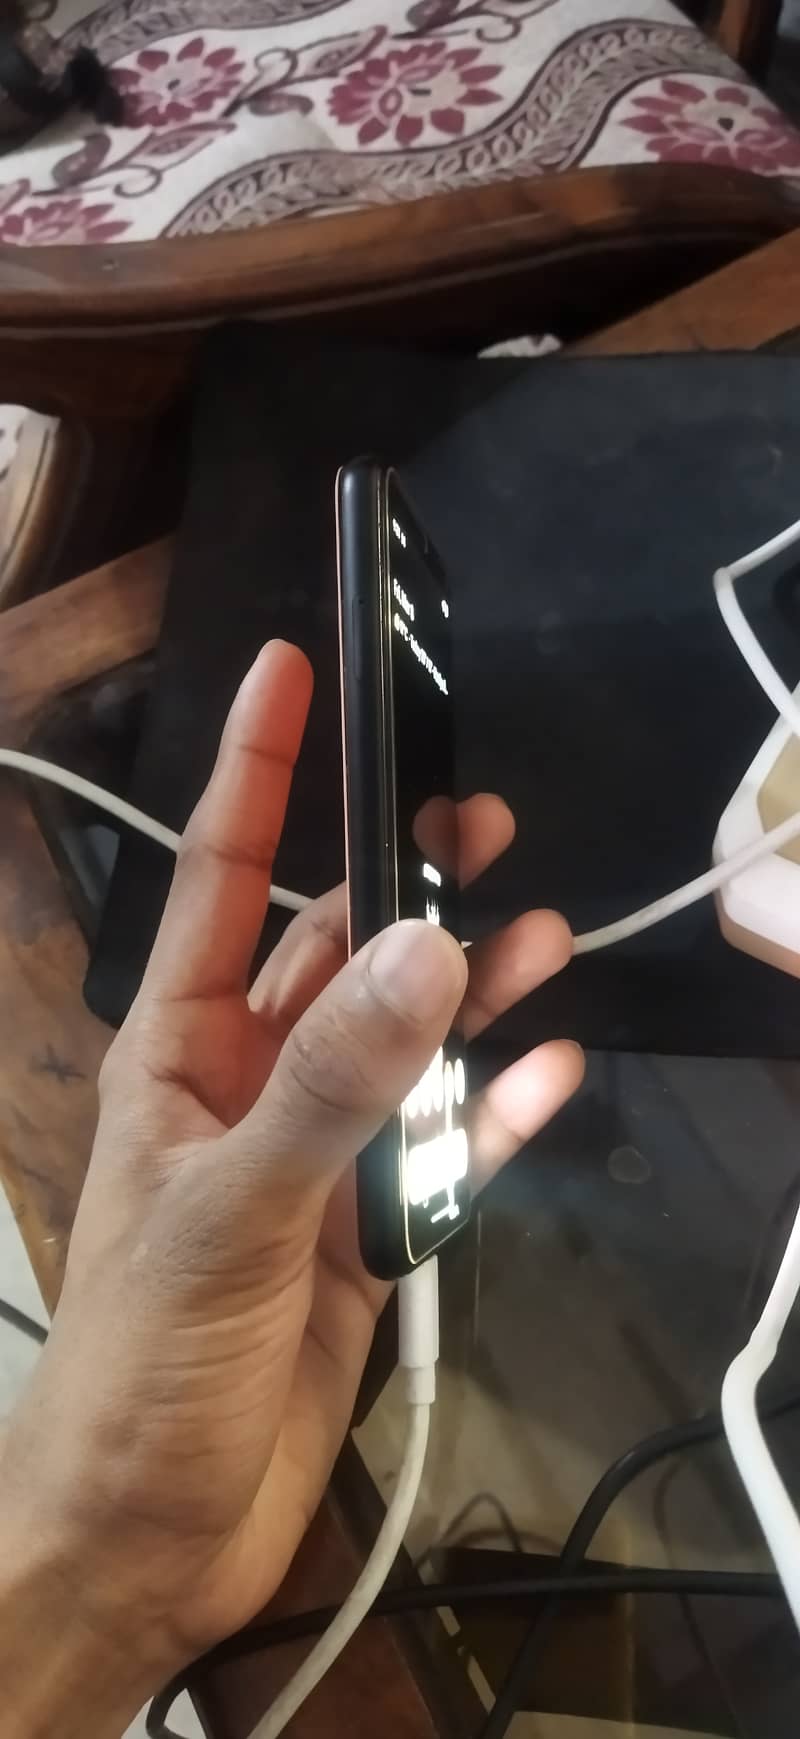 Google Pixel 4 (Only for Serious Buyers ) 1